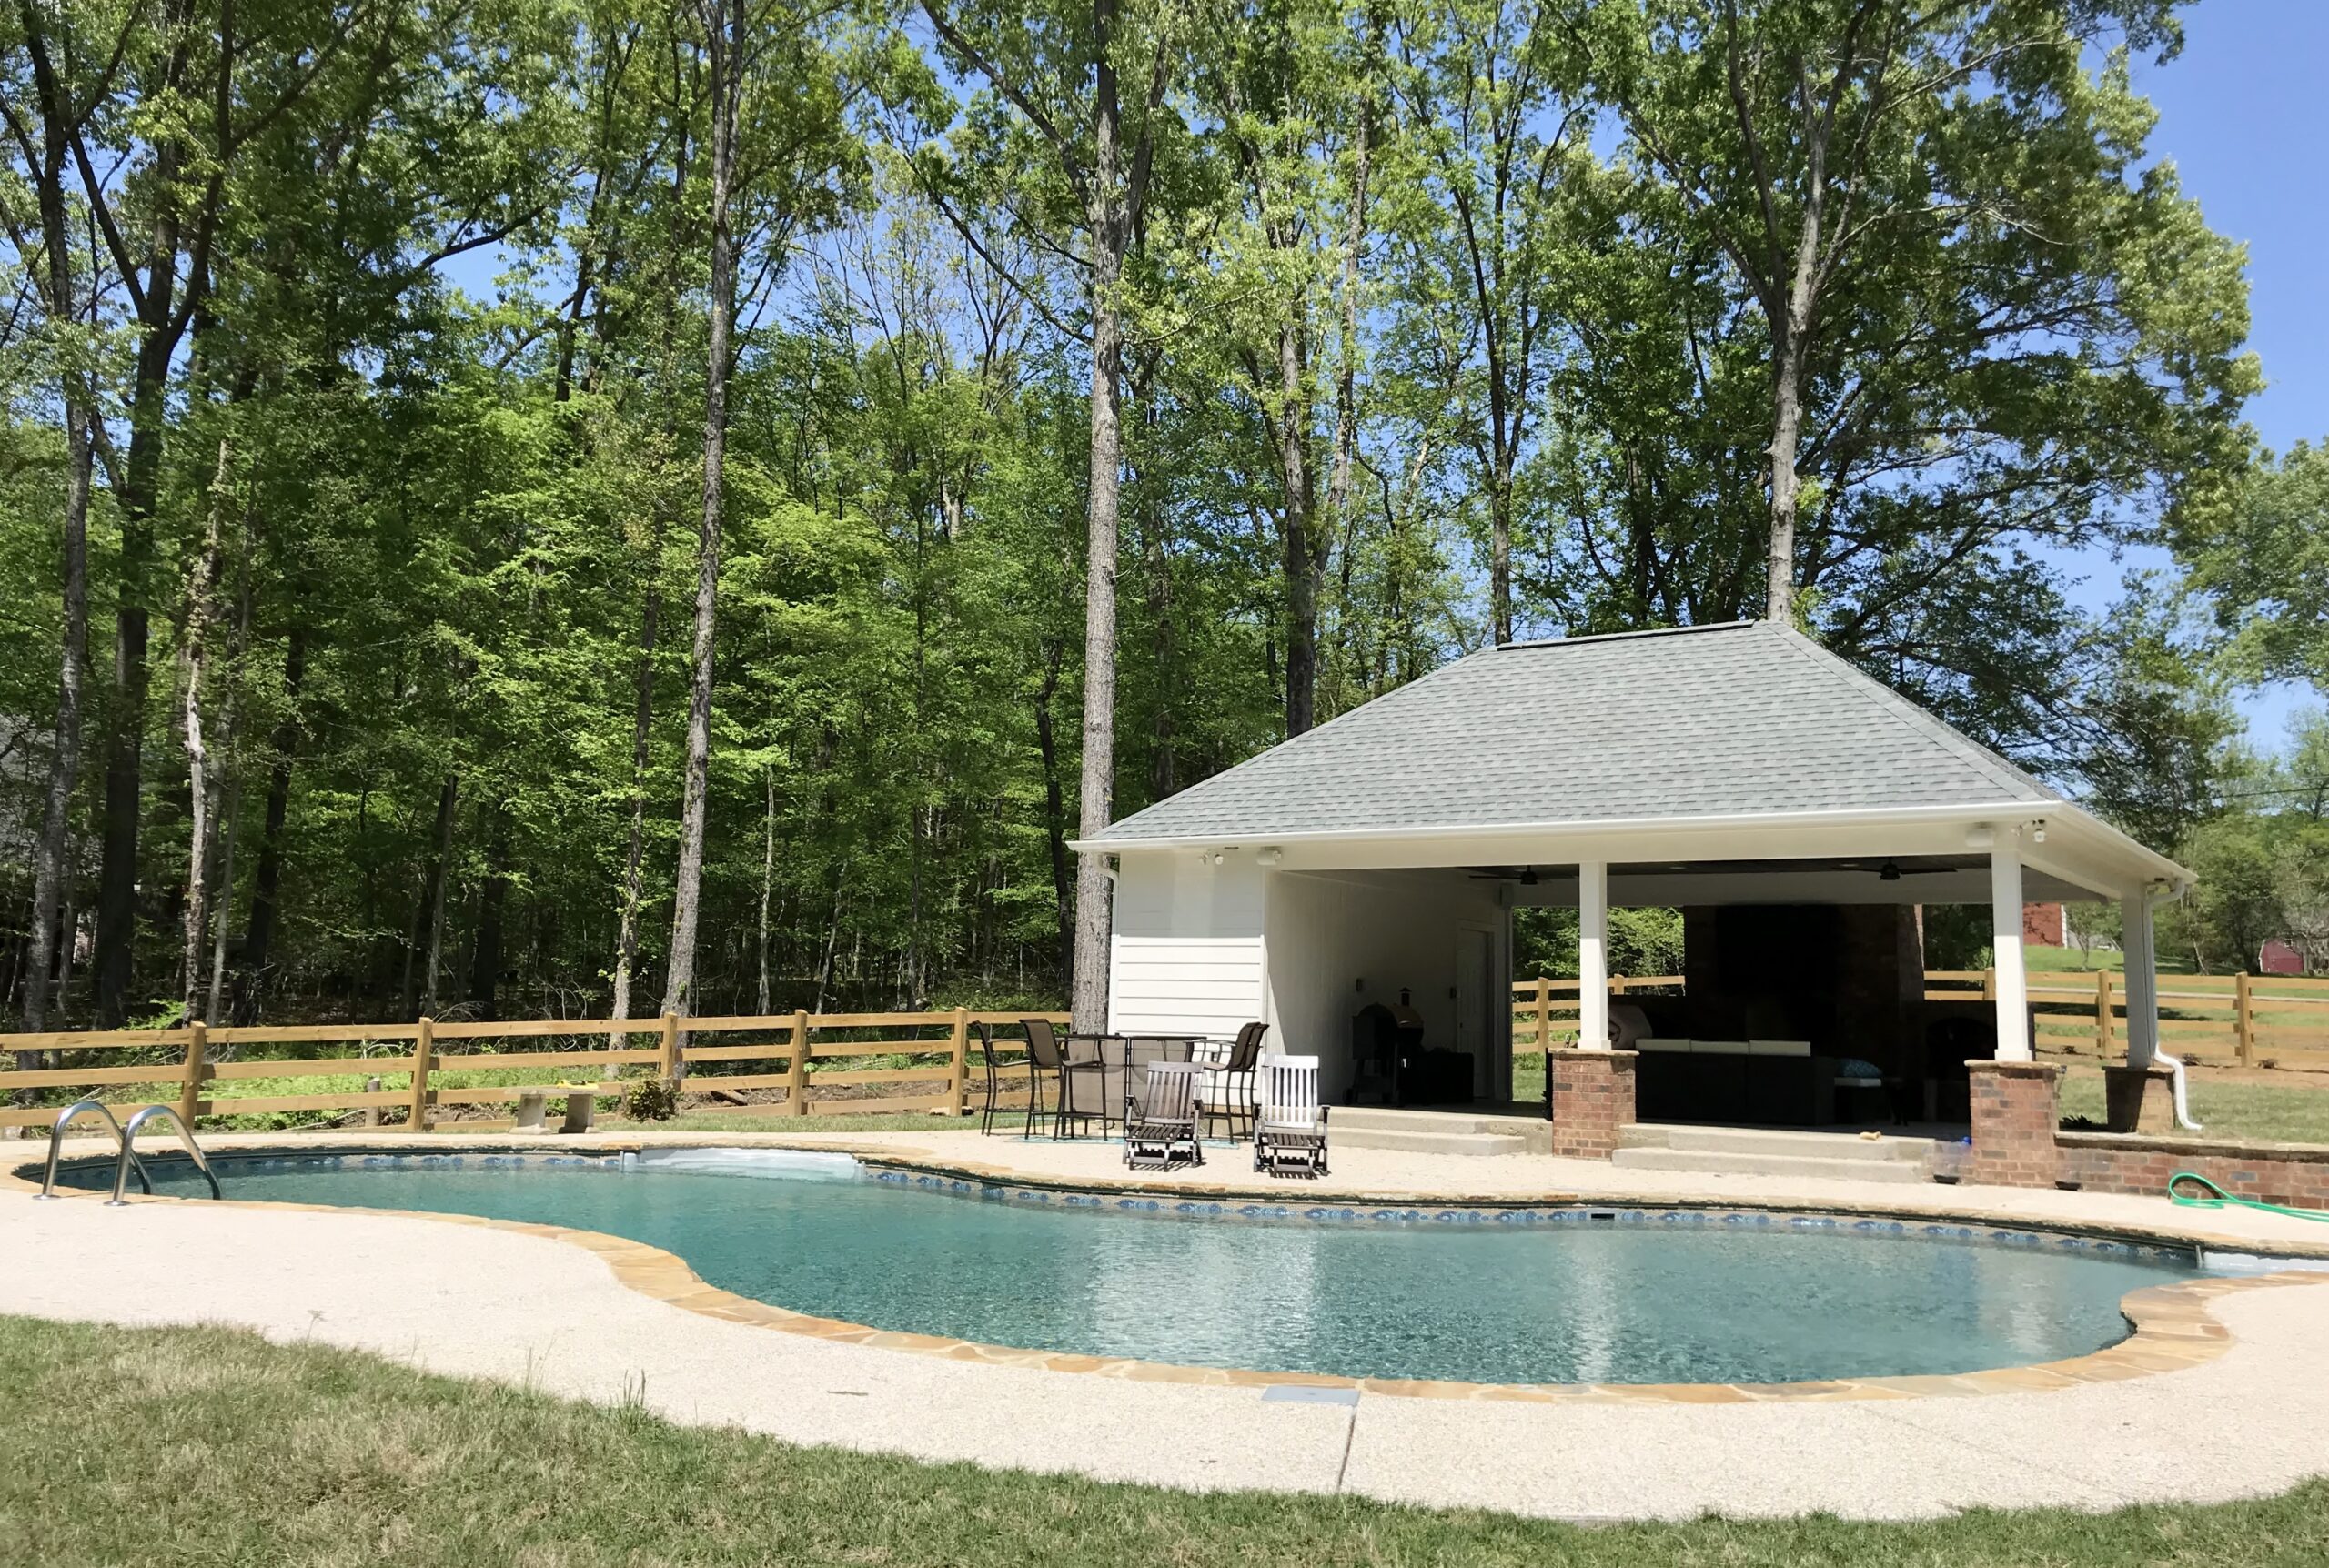 Reasons to add awnings for pool shade